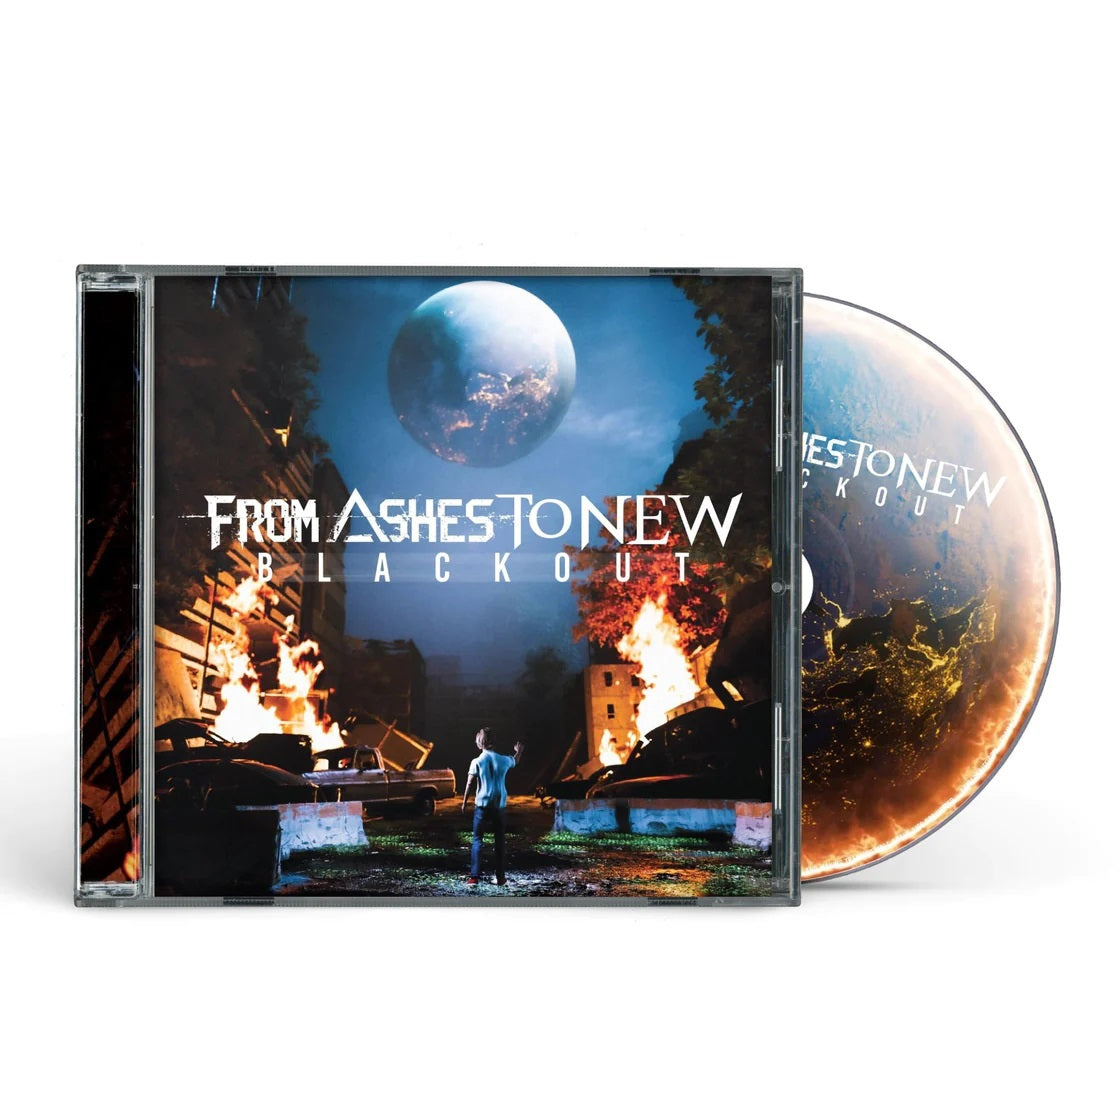 From Ashes To New - Blackout - CD - New